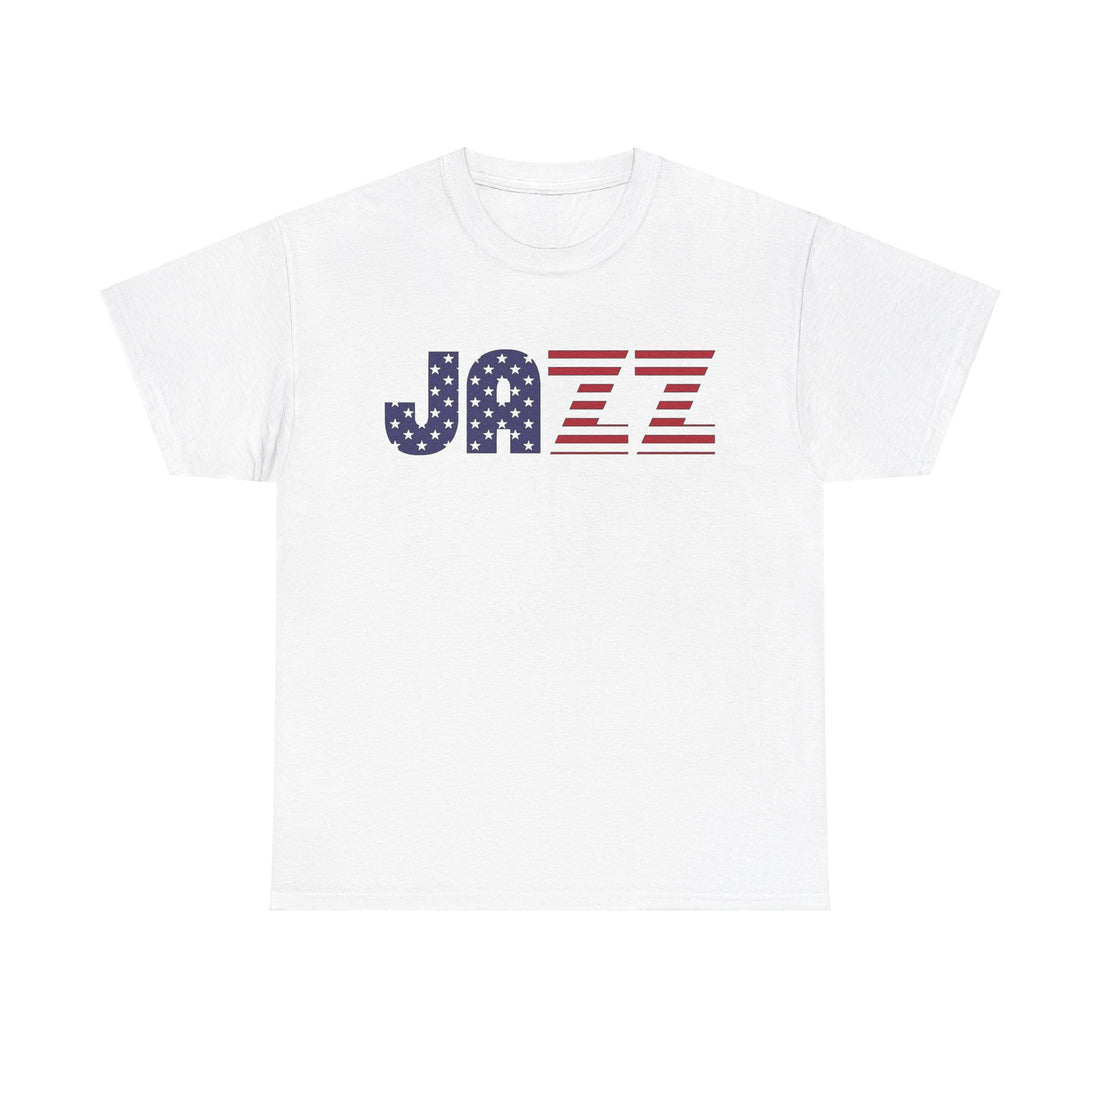 A white t shirt with an American flag imbedded into the word ’JAZZ’ 